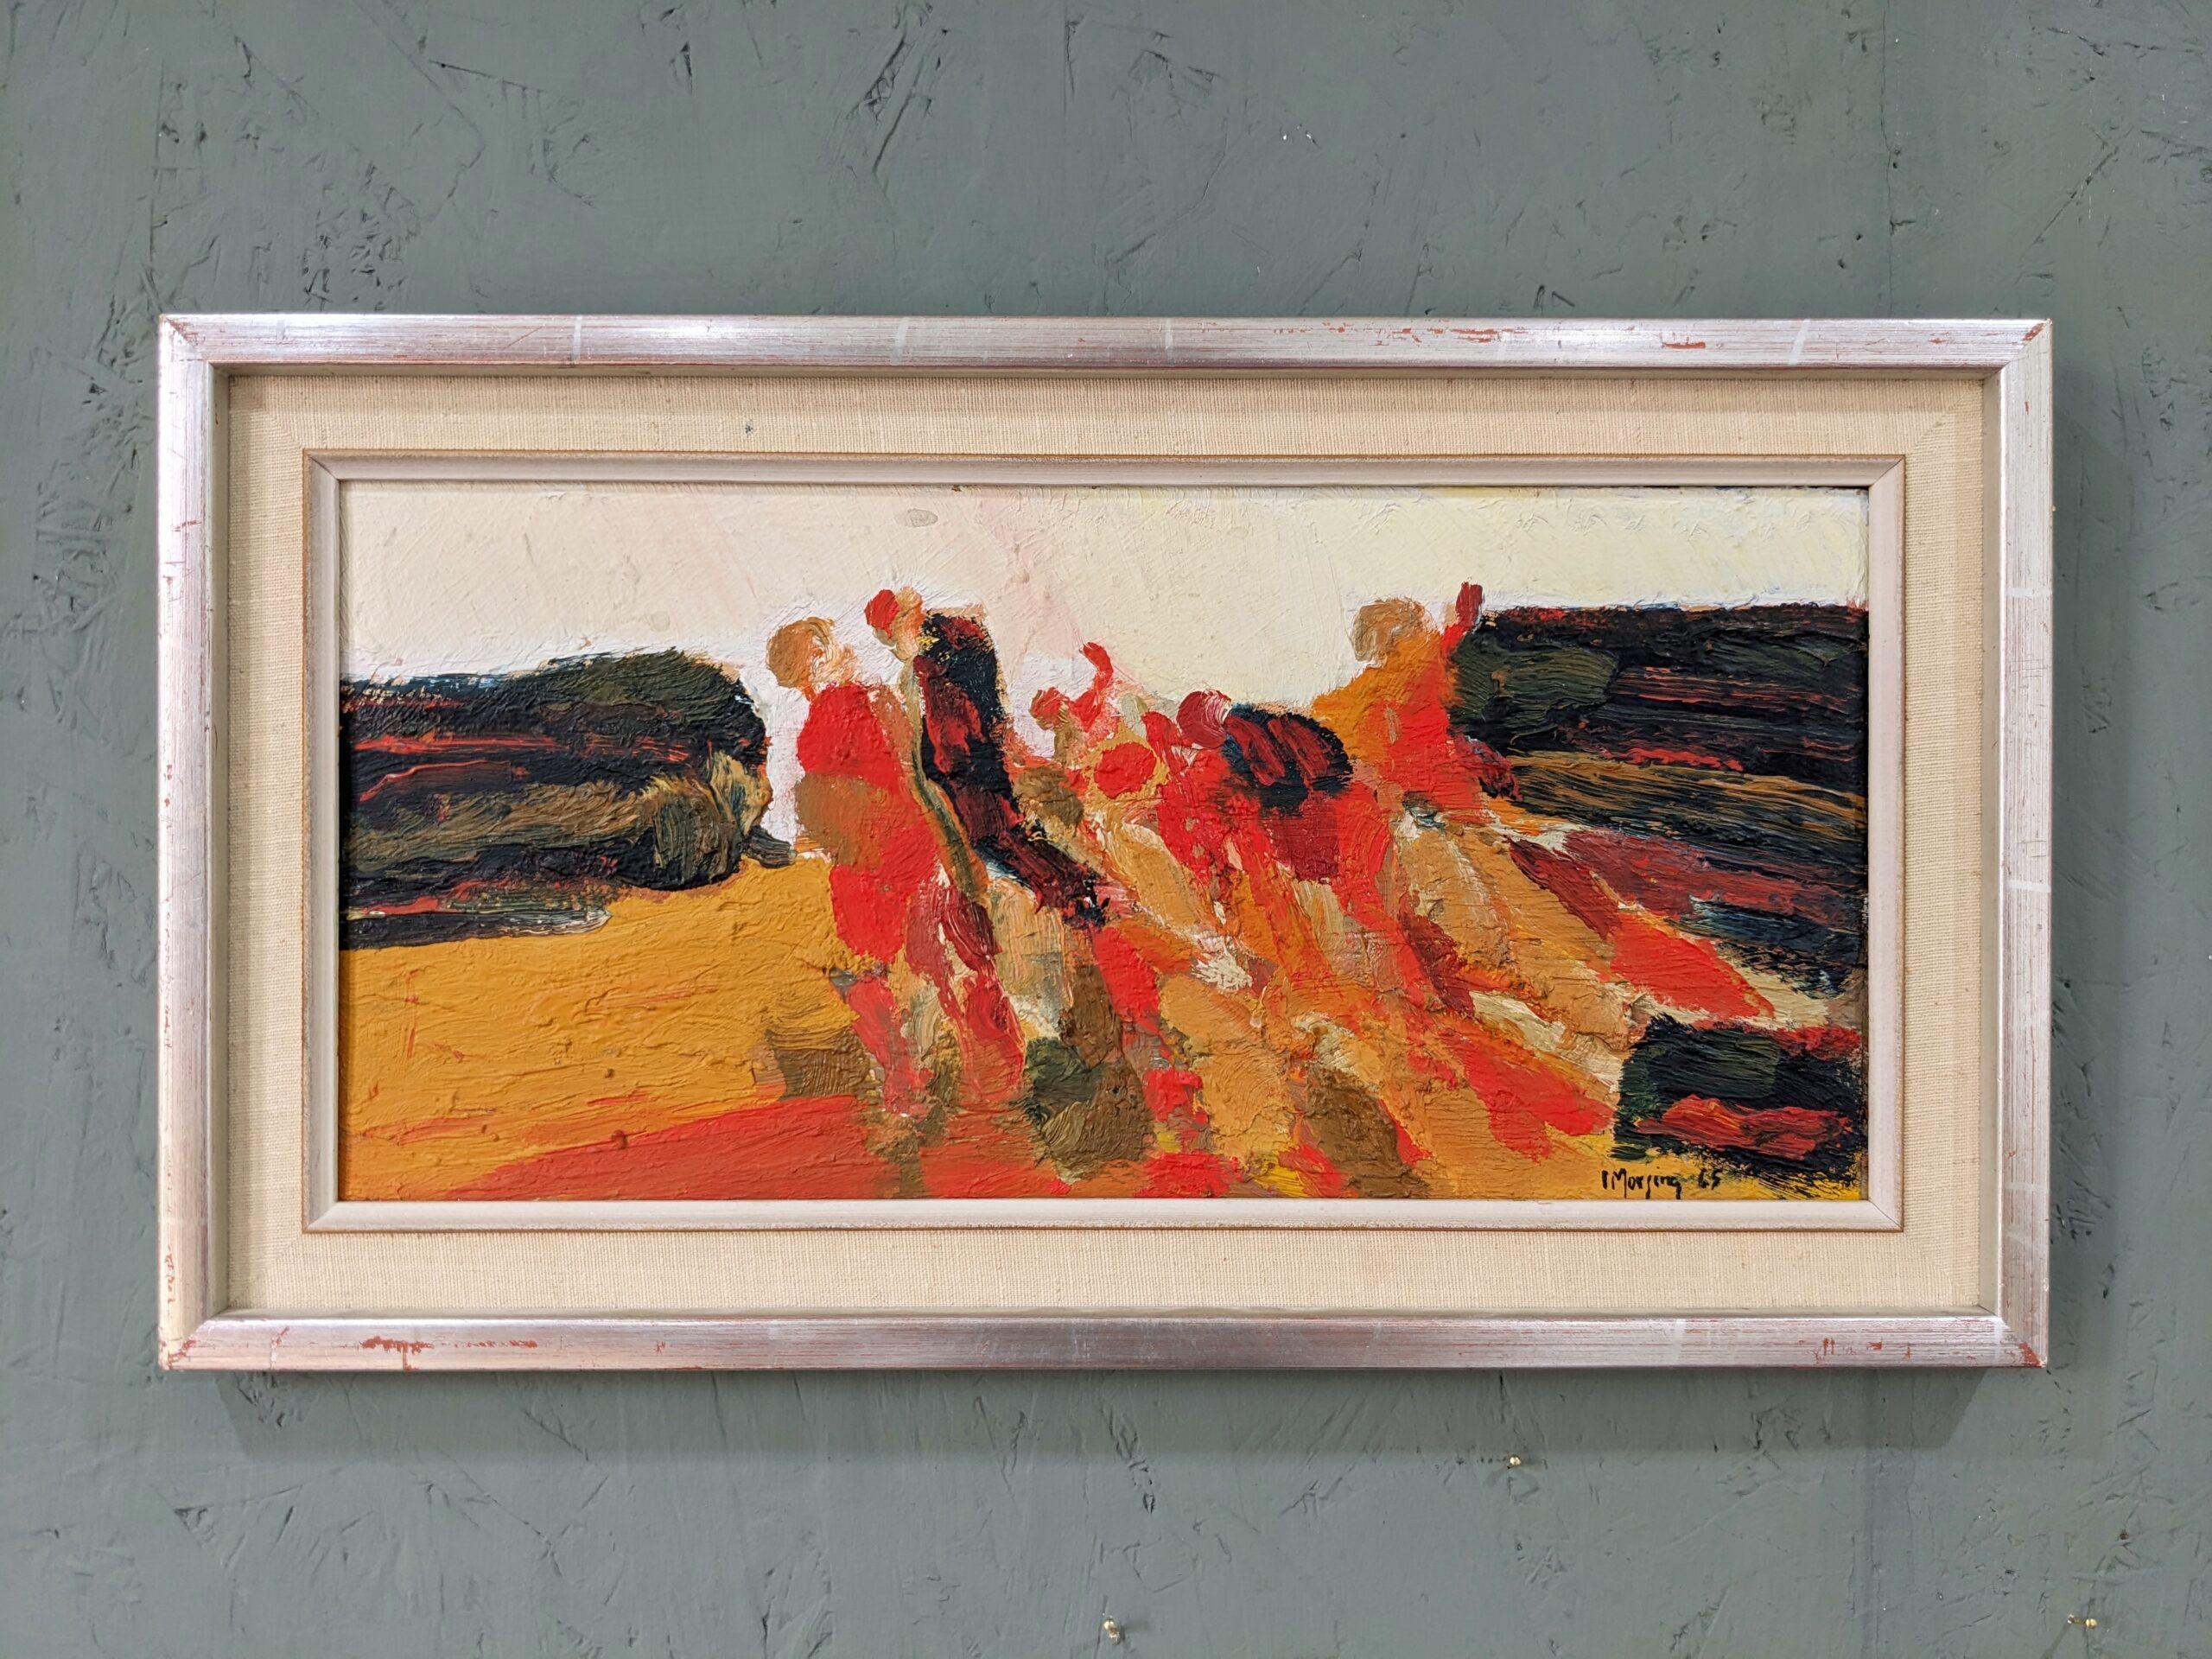 CONNECTION
Size: 26 x 47 cm (including frame)
Oil on board

A brilliantly executed and beautifully textured abstract figurative oil composition, painted in 1965 by the established Swedish artist Ivar Morsing (1919-2009), whose works have been